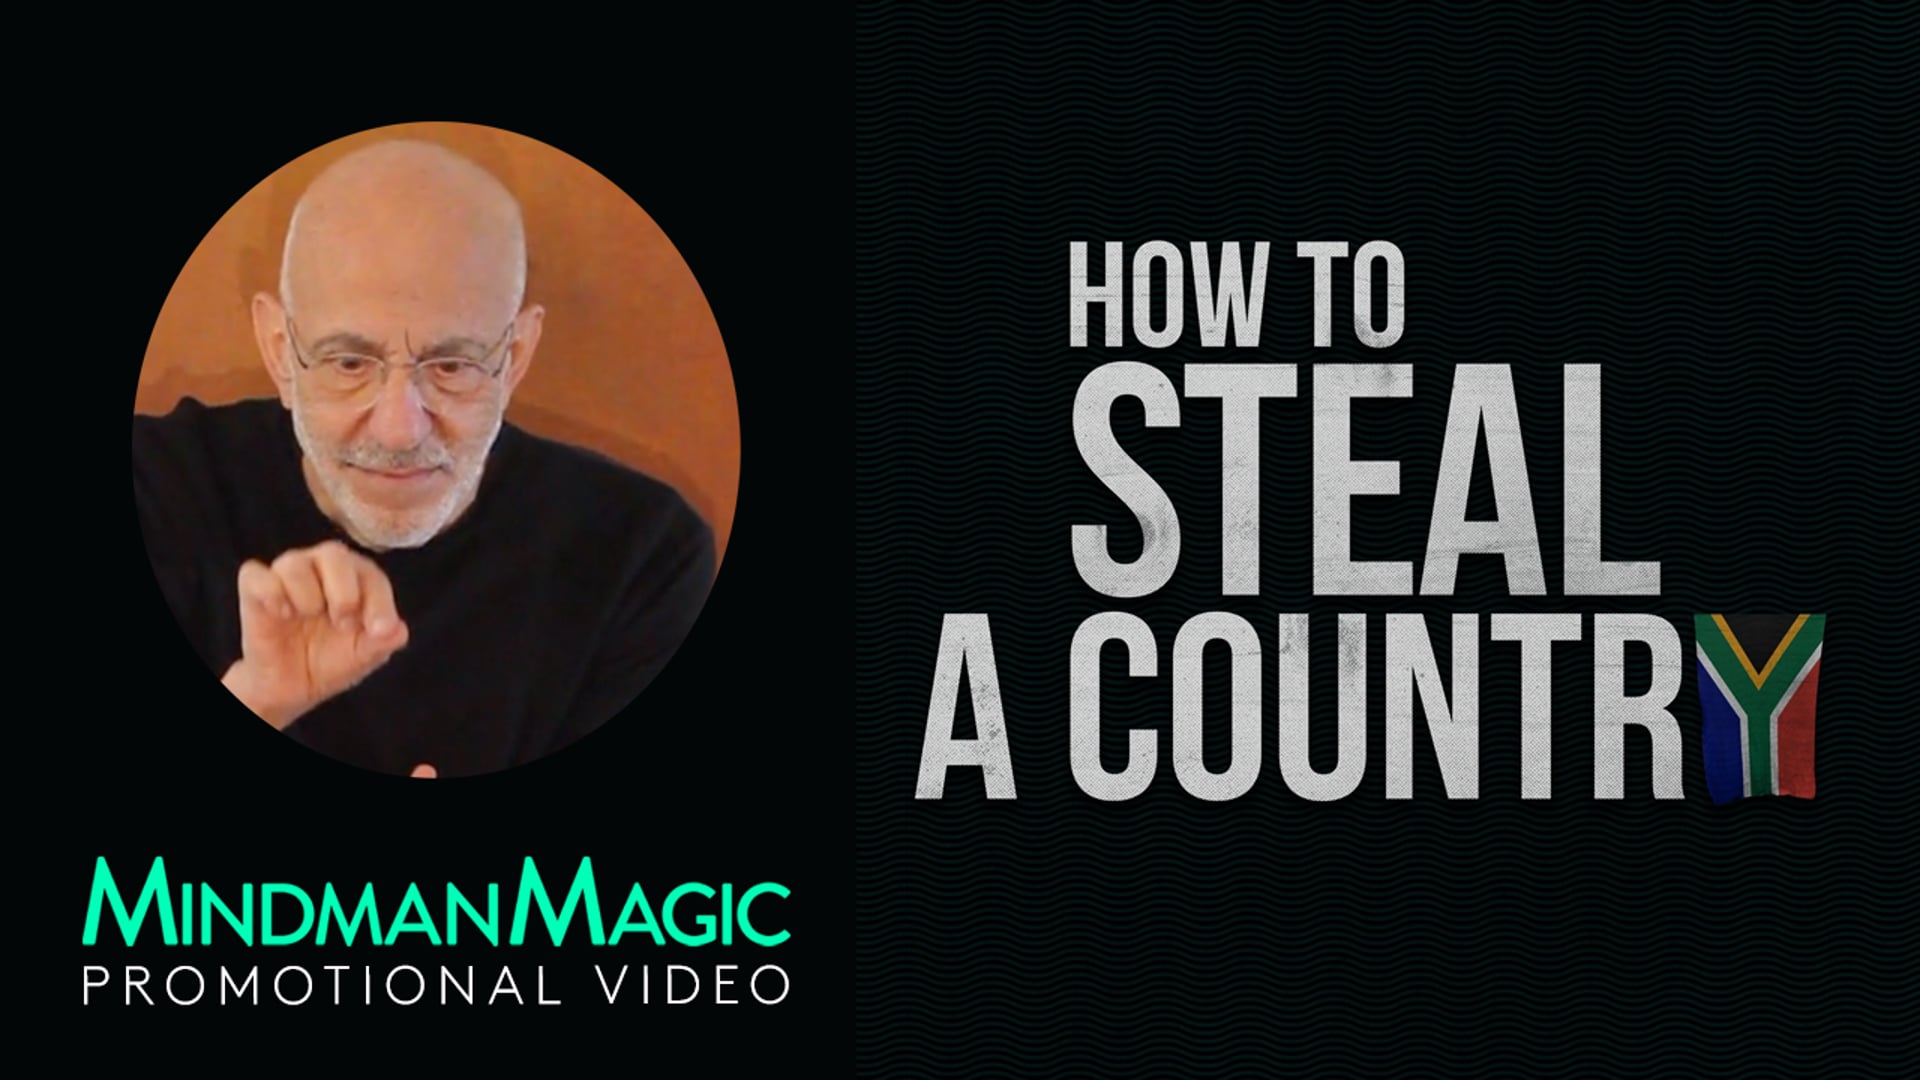 Magic Promo 'How to Steal a Country'